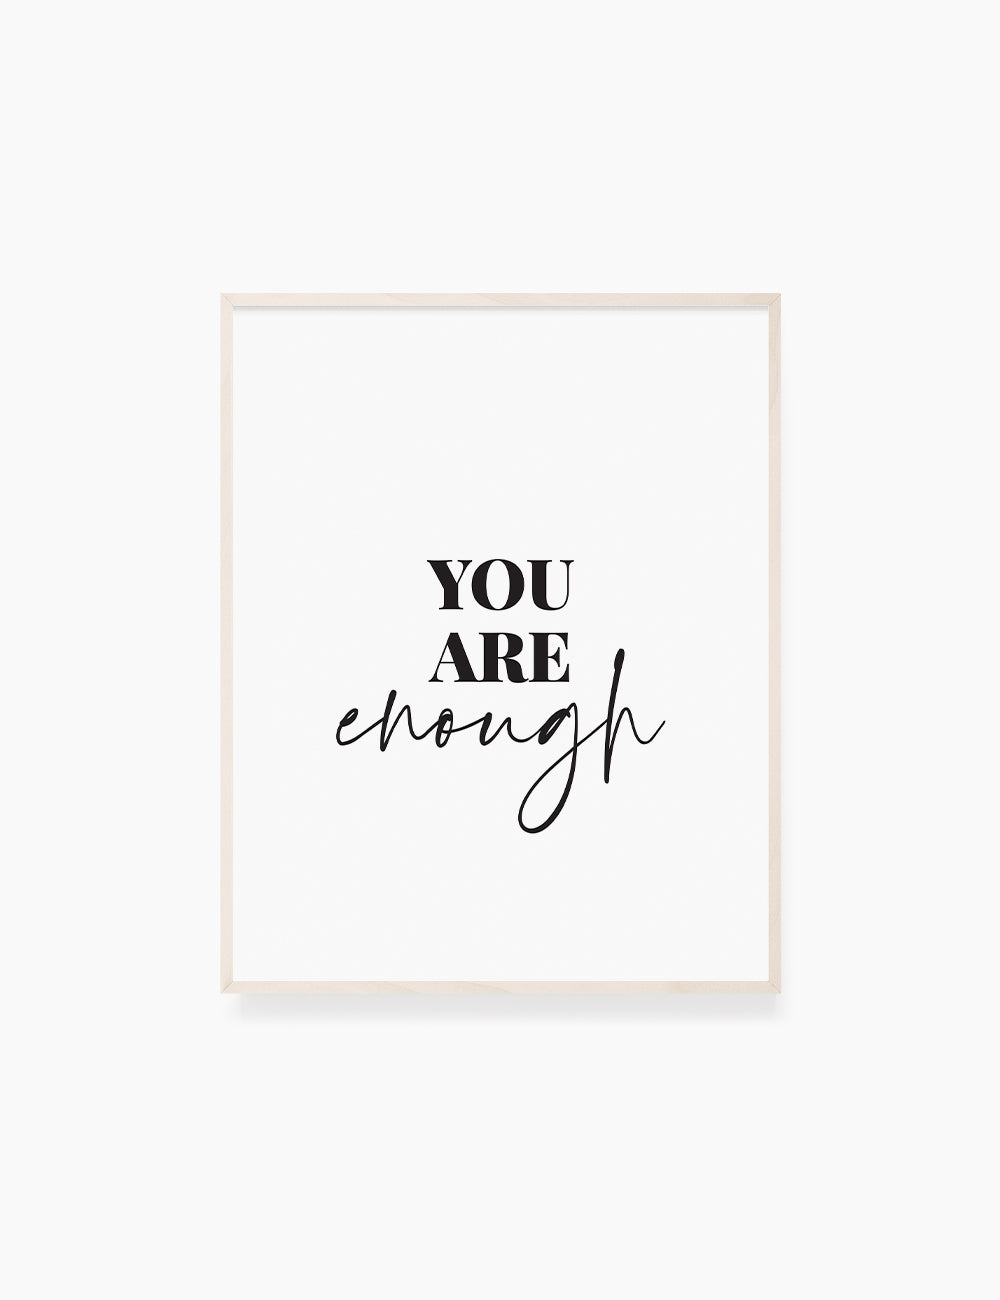 Printable Wall Art Quote: YOU ARE ENOUGH. Printable Poster. Inspirational Quote. Motivational Quote. WA009 - Paper Moon Art & Design